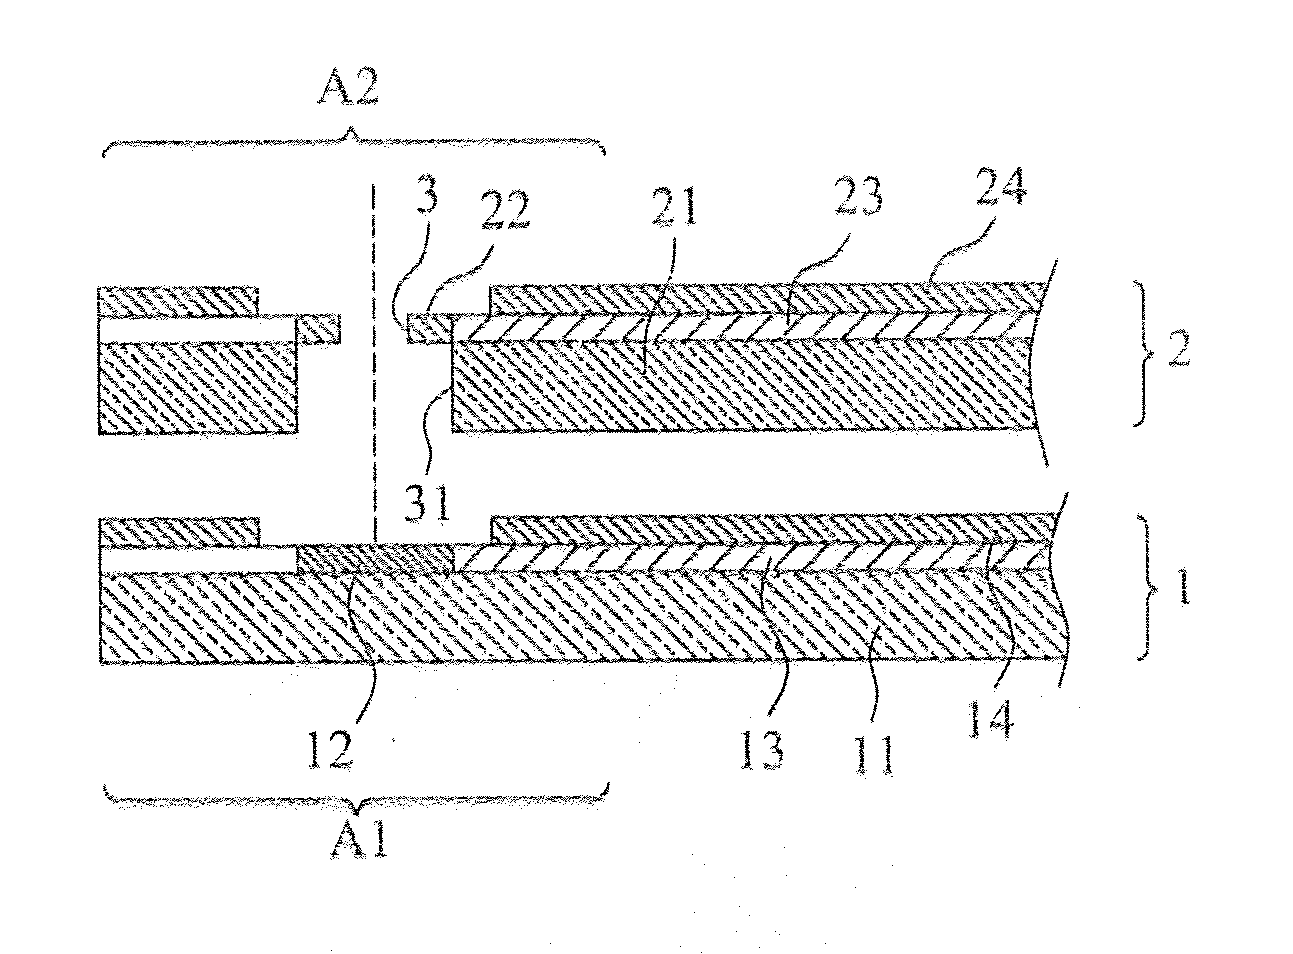 Interconnecting conduction structure for electrically connecting conductive traces of flexible circuit boards